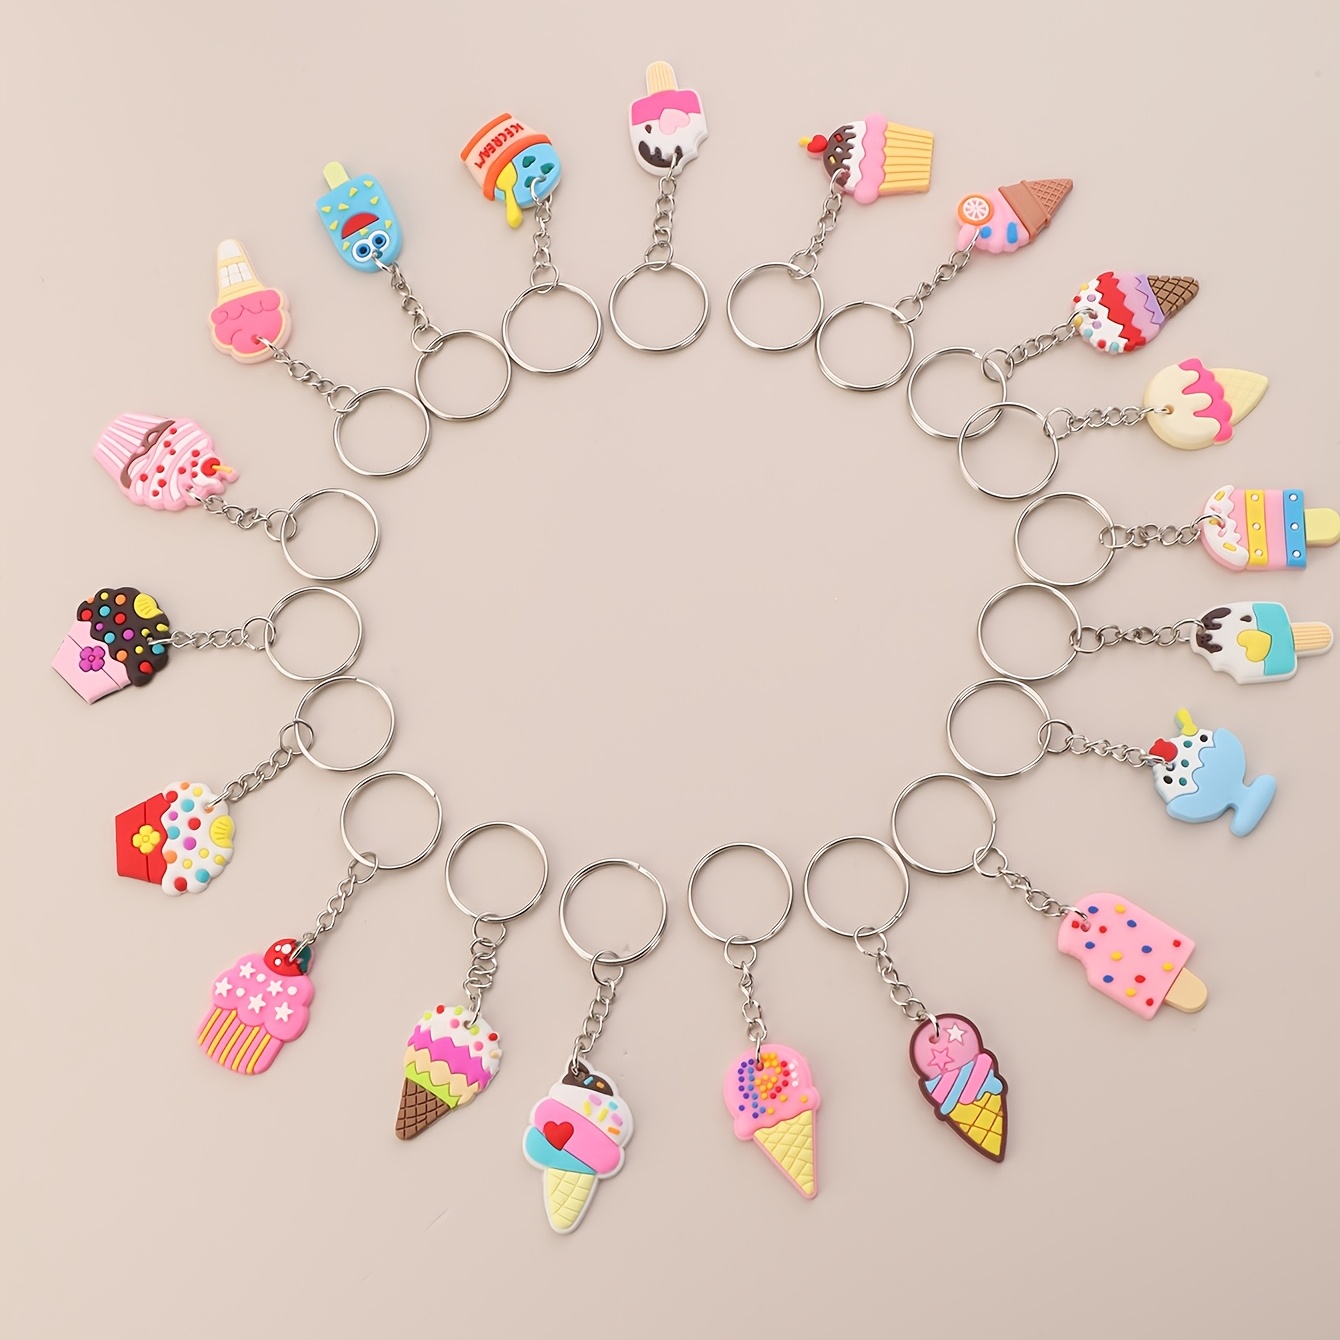 KiwiCraftSupply Ice Cream Keychains, Cupcake Party Favors, Popsicle Keychains for Kids Party, Silicone Keychain Sets, Backpack Keychains